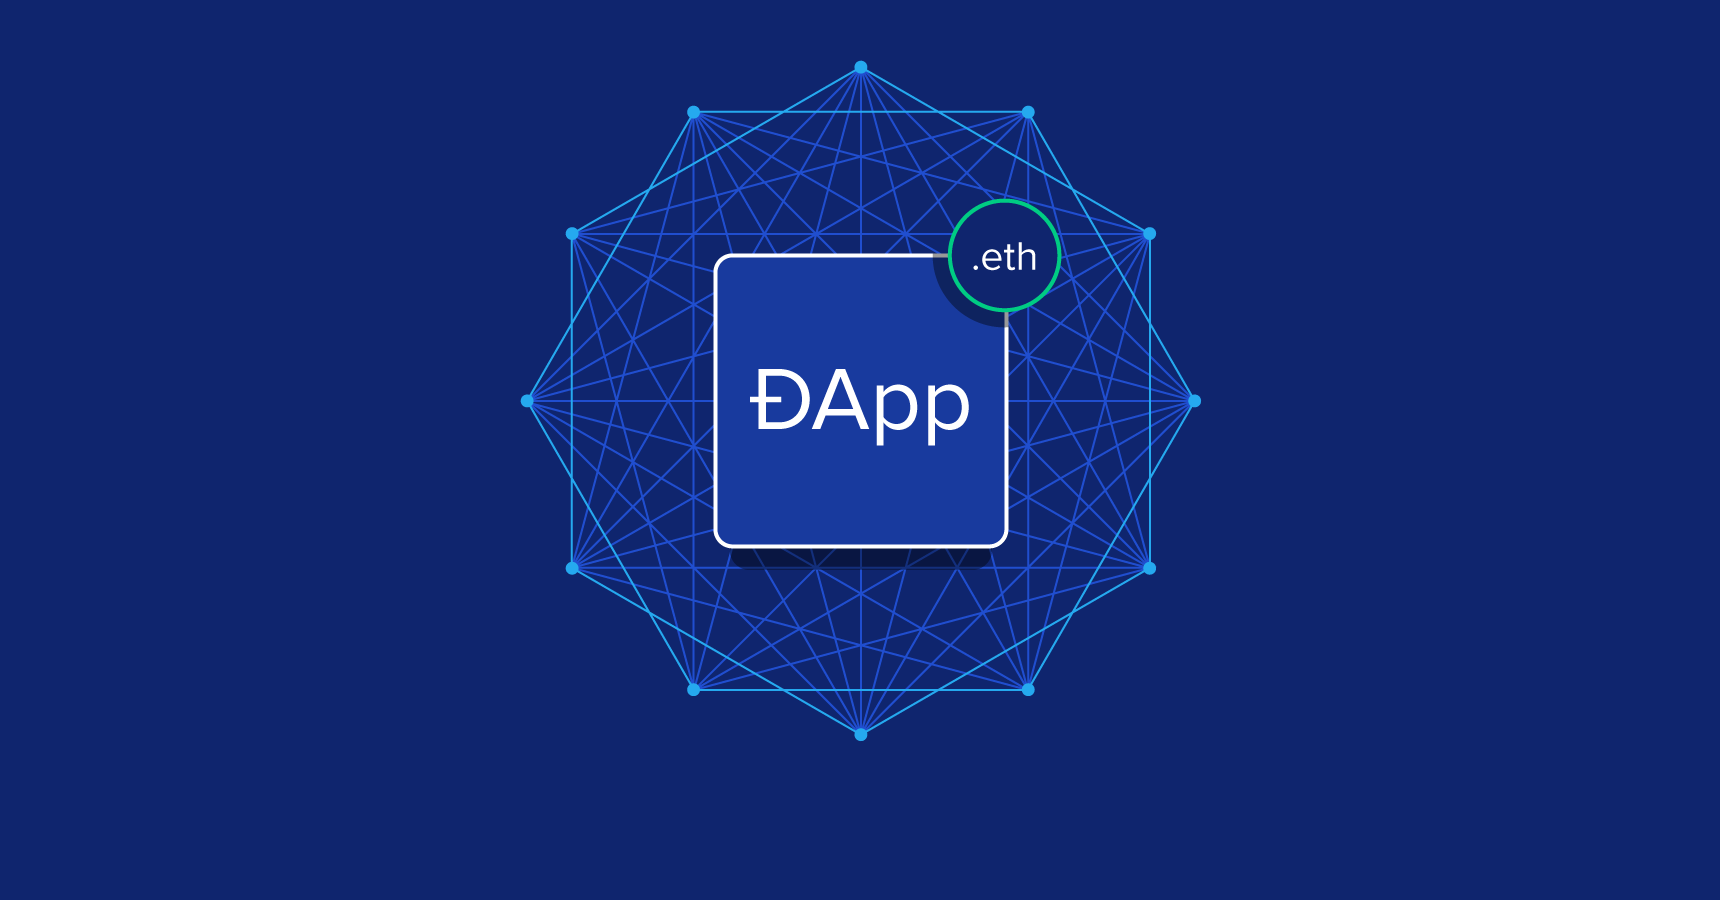 What Are DApps (Decentralized Applications)